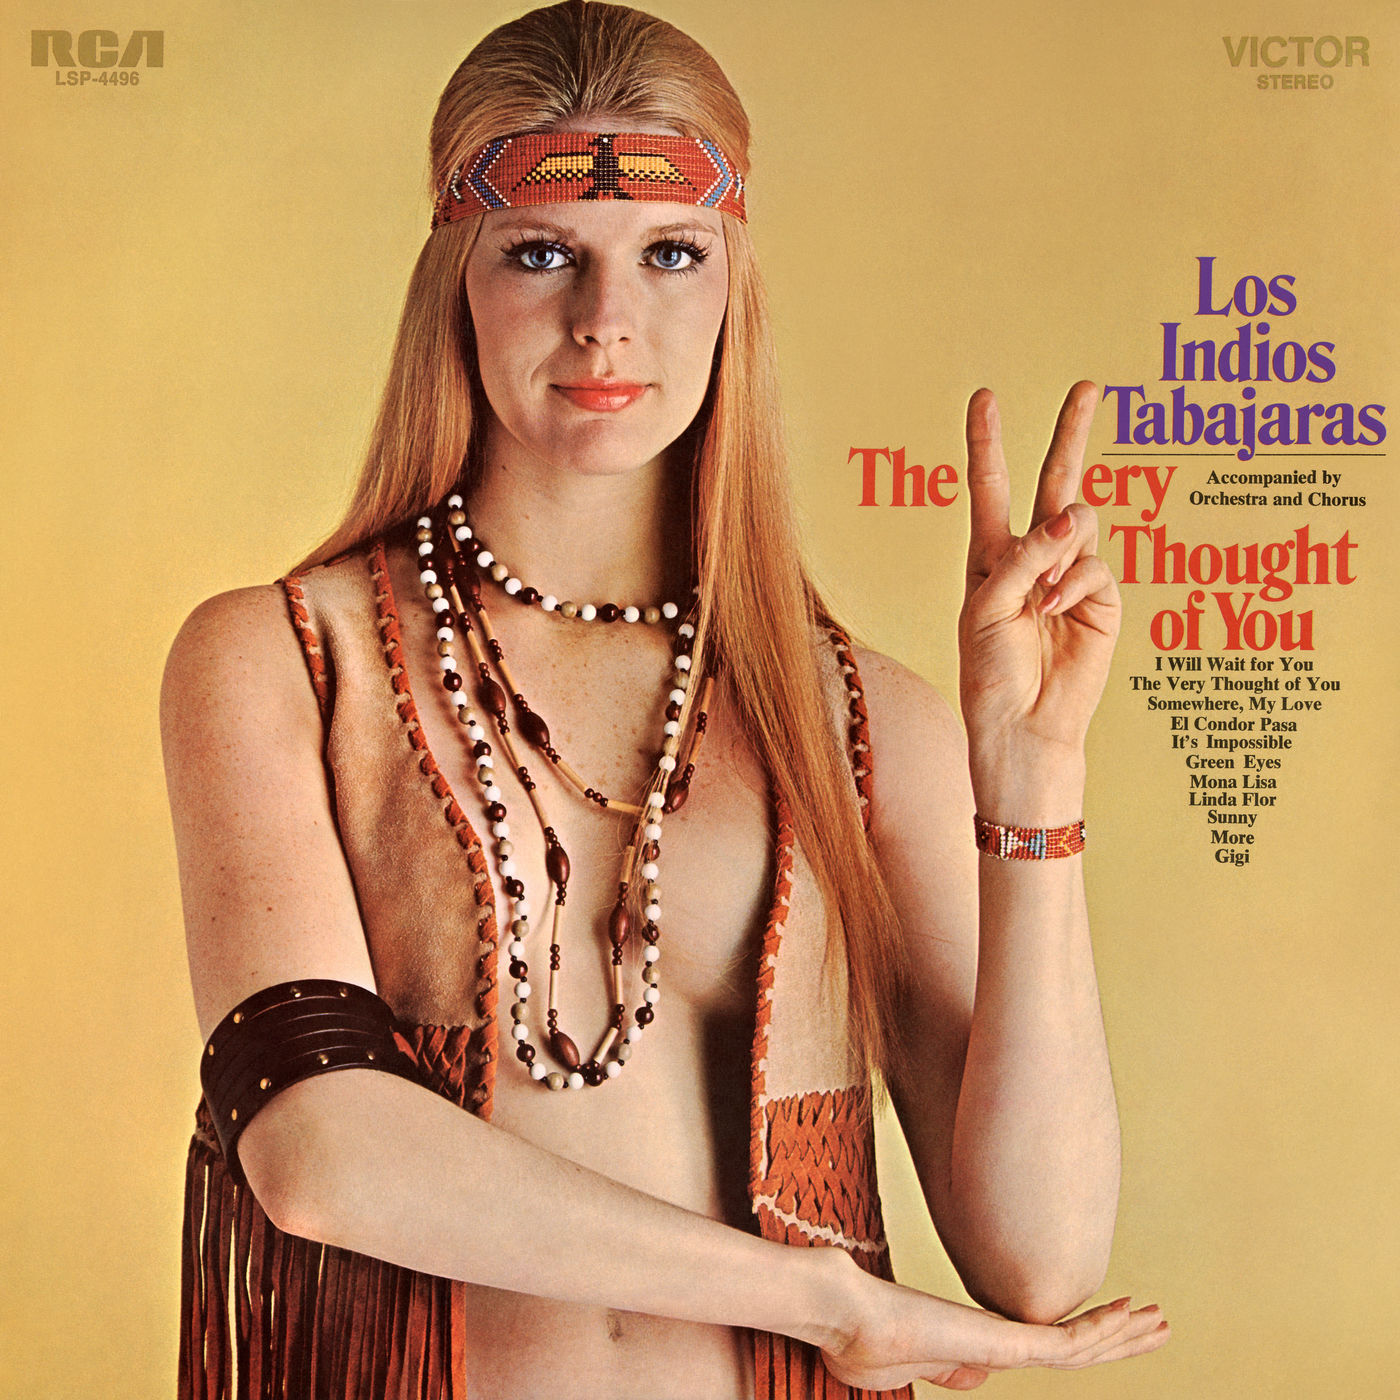 Los Indios Tabajaras – The Very Thought of You (1971/2021) [FLAC 24bit/192kHz]